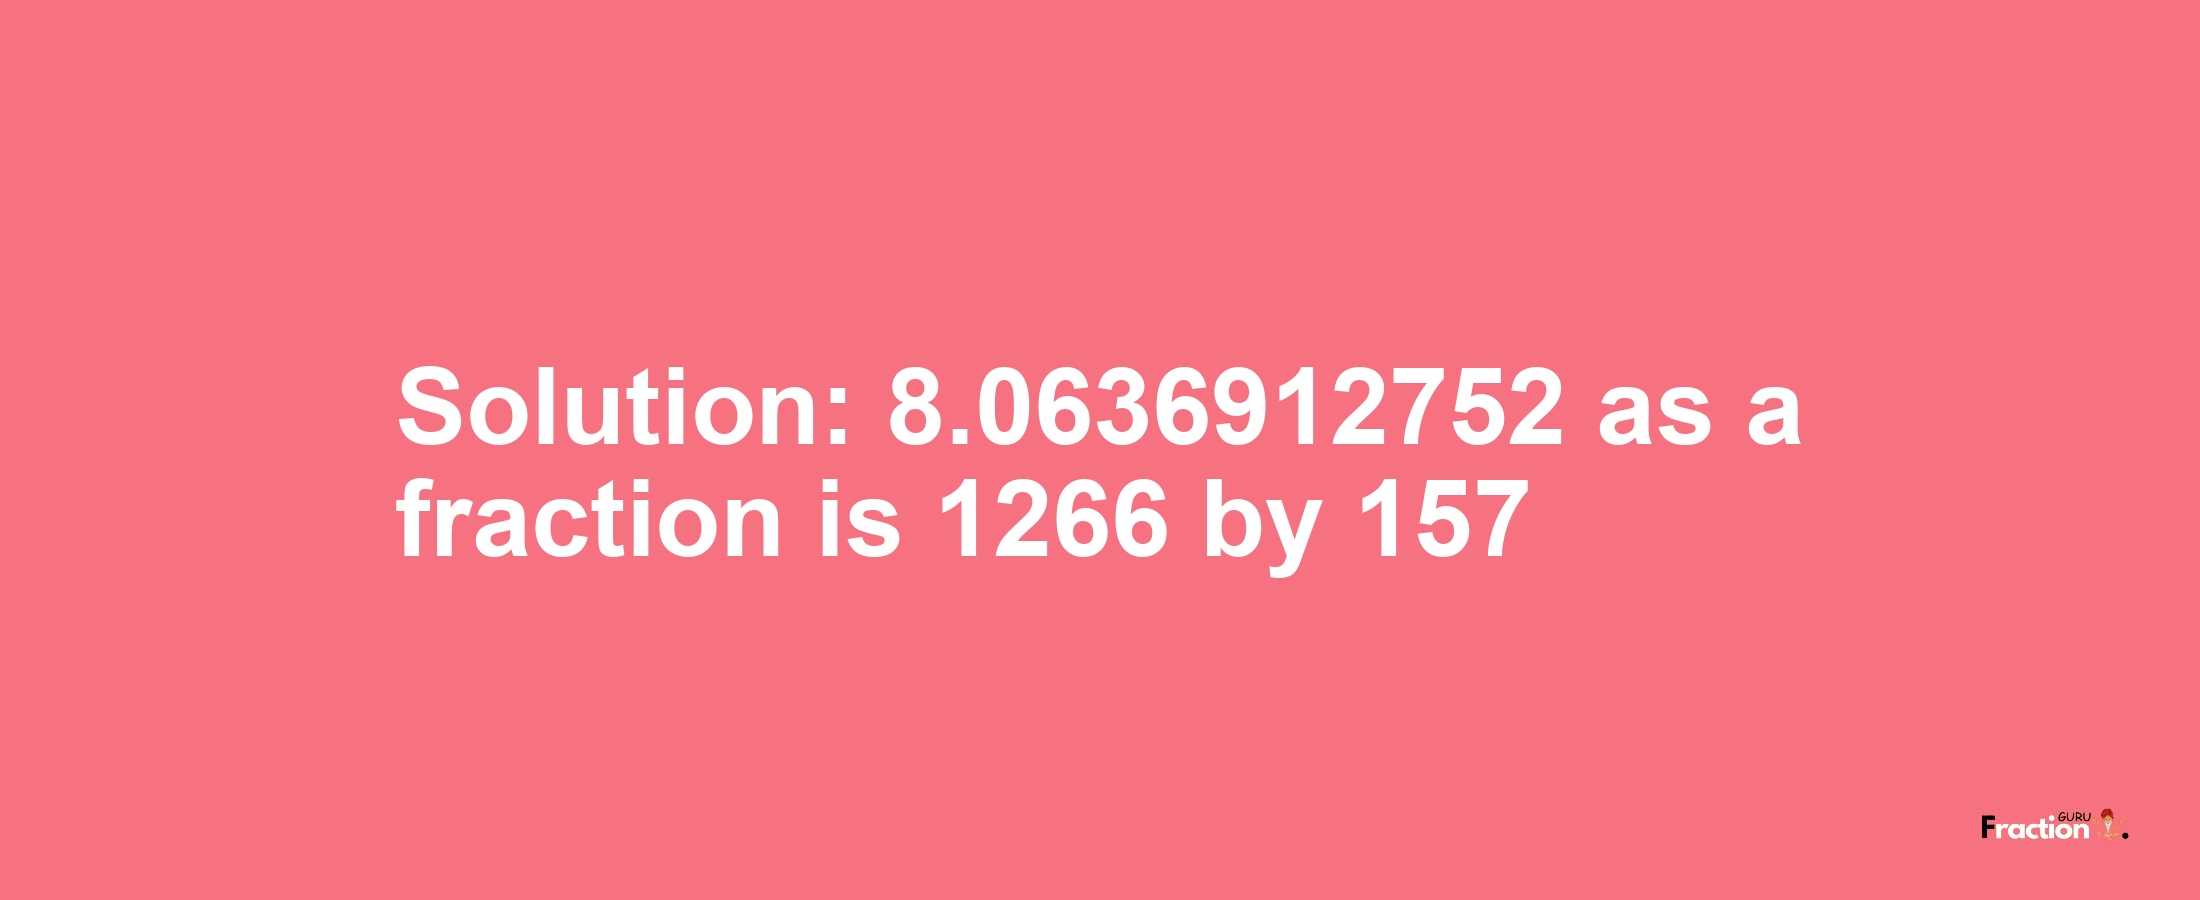 Solution:8.0636912752 as a fraction is 1266/157